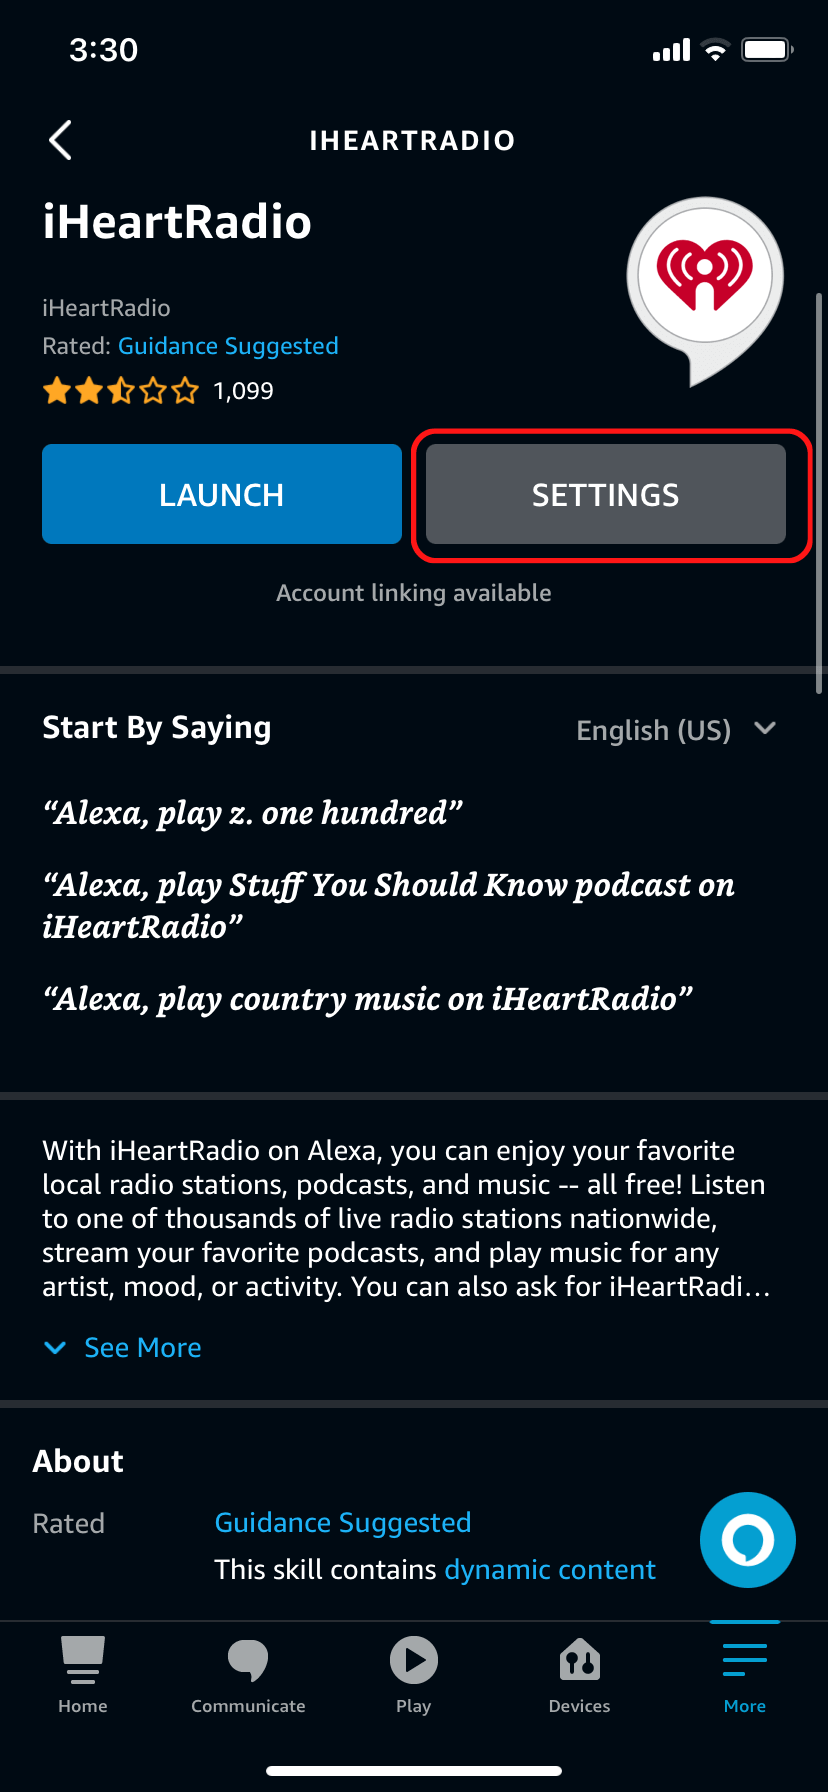 The iHeartRadio skill page in the Alexa app, showing the Settings button